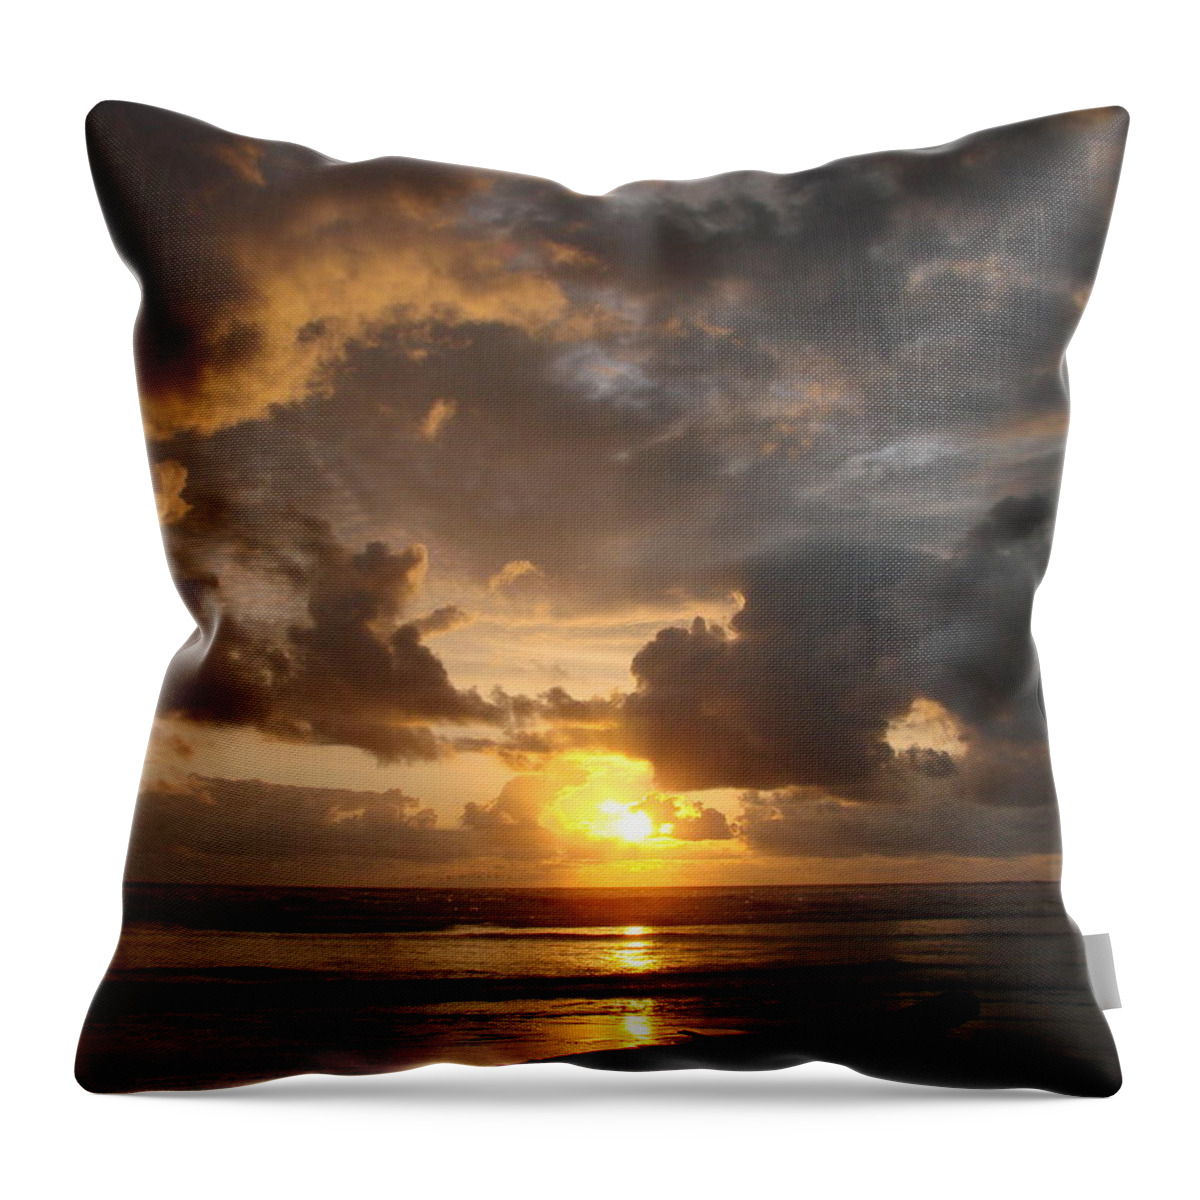 Sunset Throw Pillow featuring the photograph Majestic Sunset by Athena Mckinzie